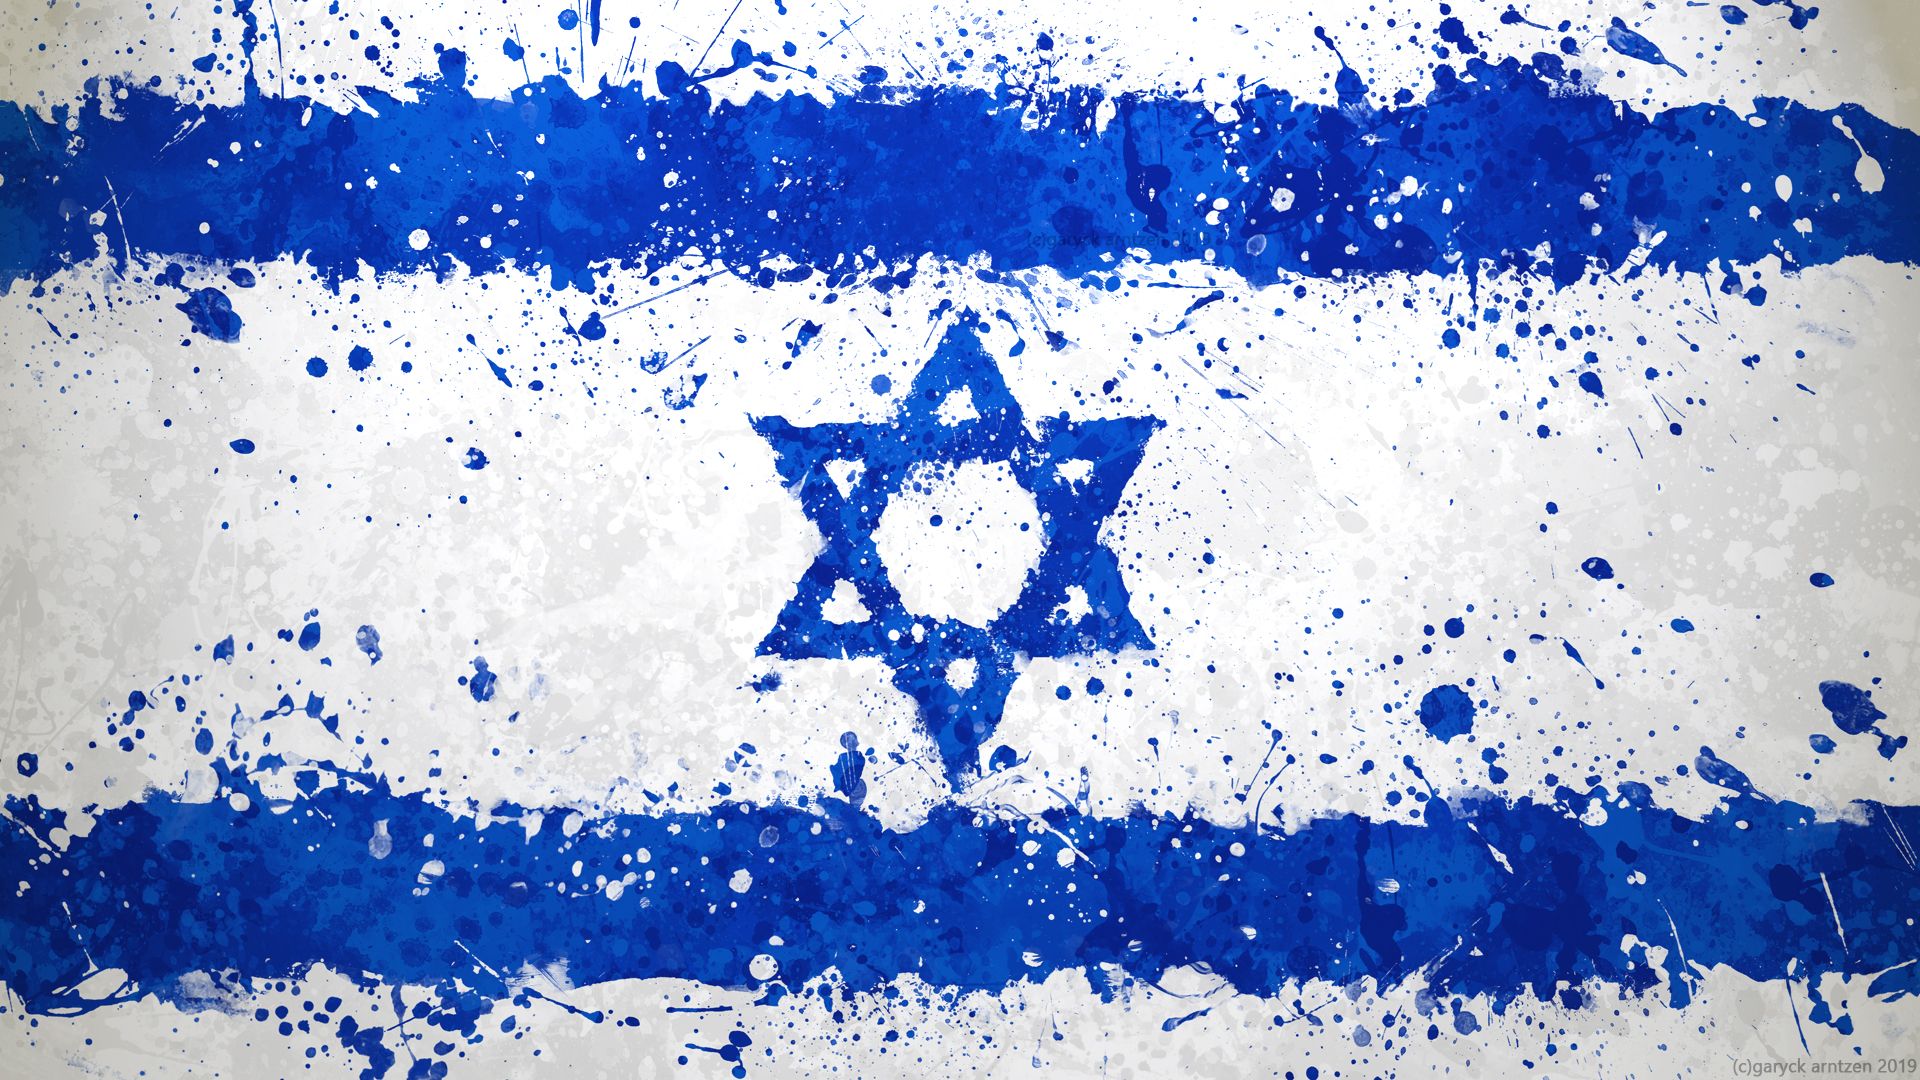 Shalom R Israel, I've Been Doing Some Messy, Painterly Wallpaper